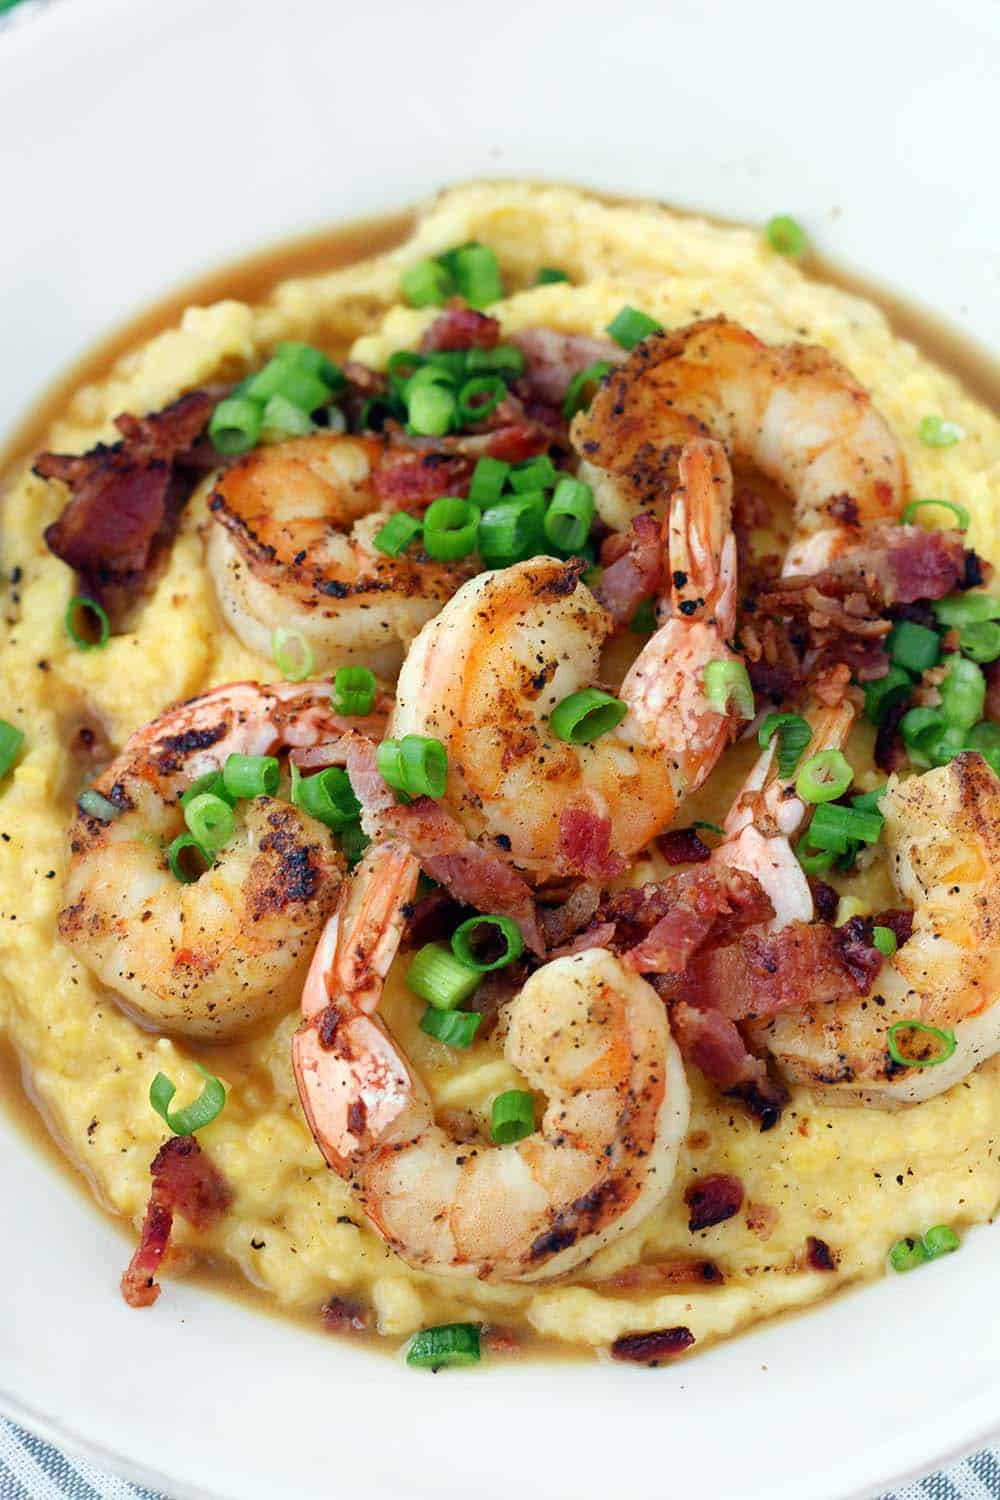 Recipes For Shrimp And Grits
 Easy Classic Shrimp and Grits Bowl of Delicious